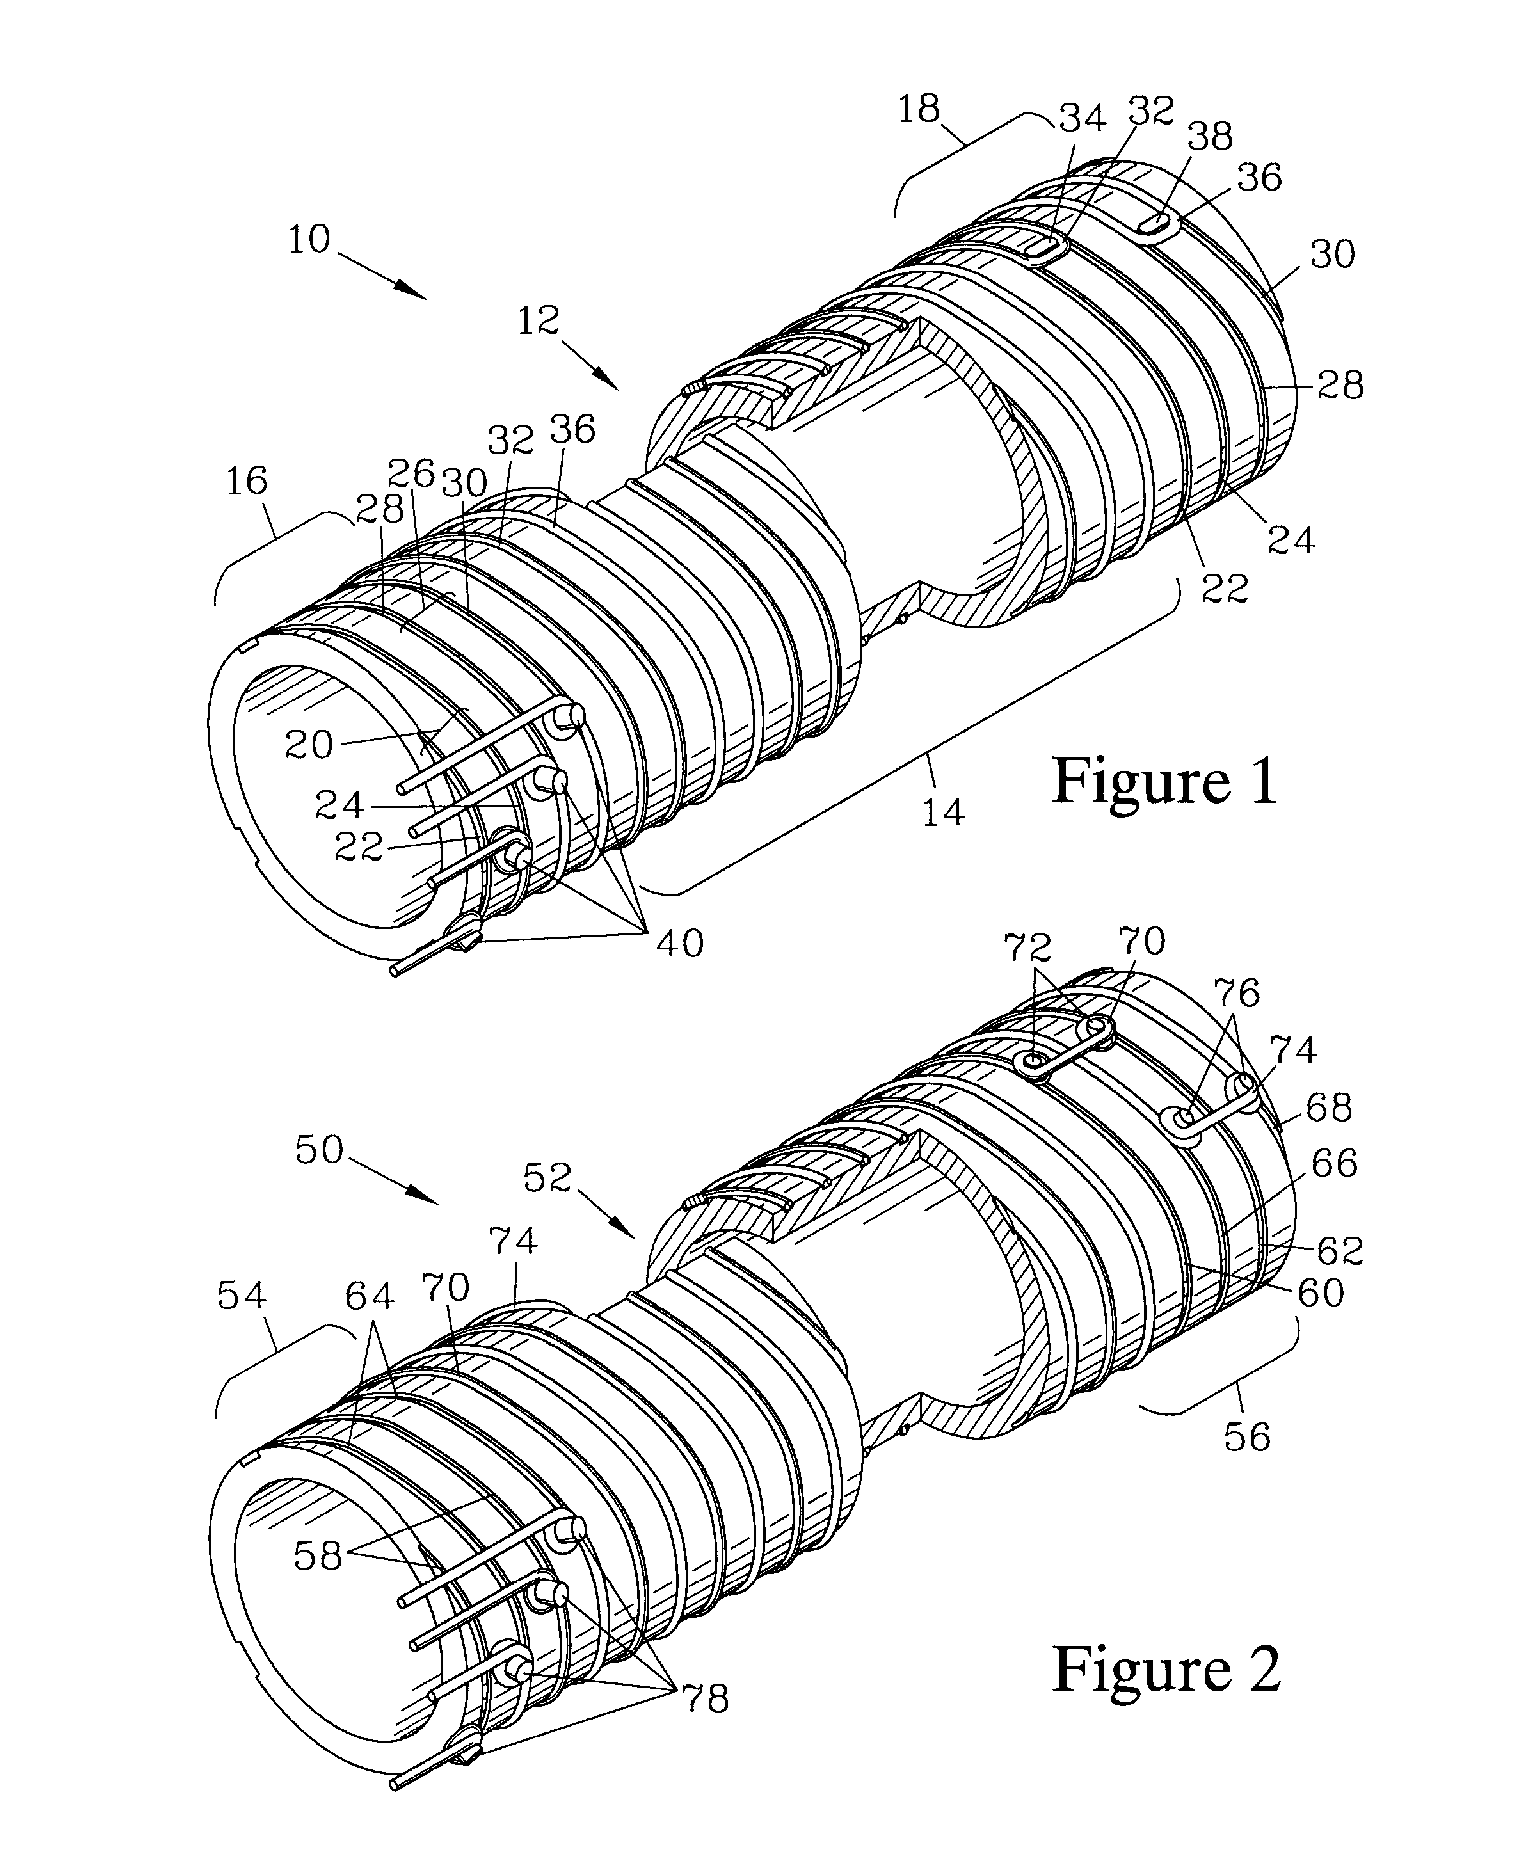 Two-circuit grip heater